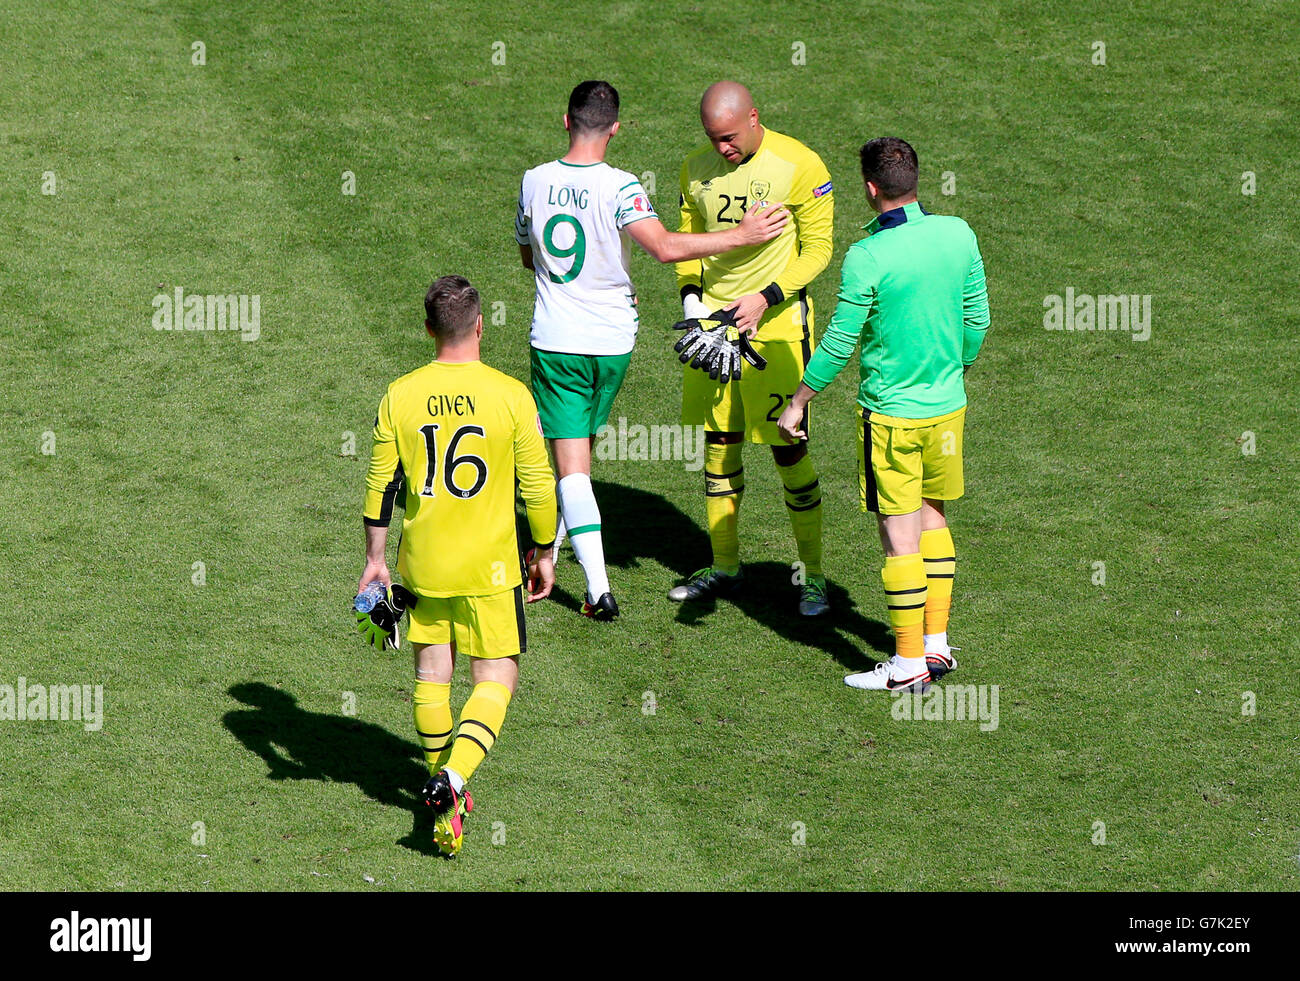 Republic of Ireland goalkeeper Shay Given (16) walks over to ...